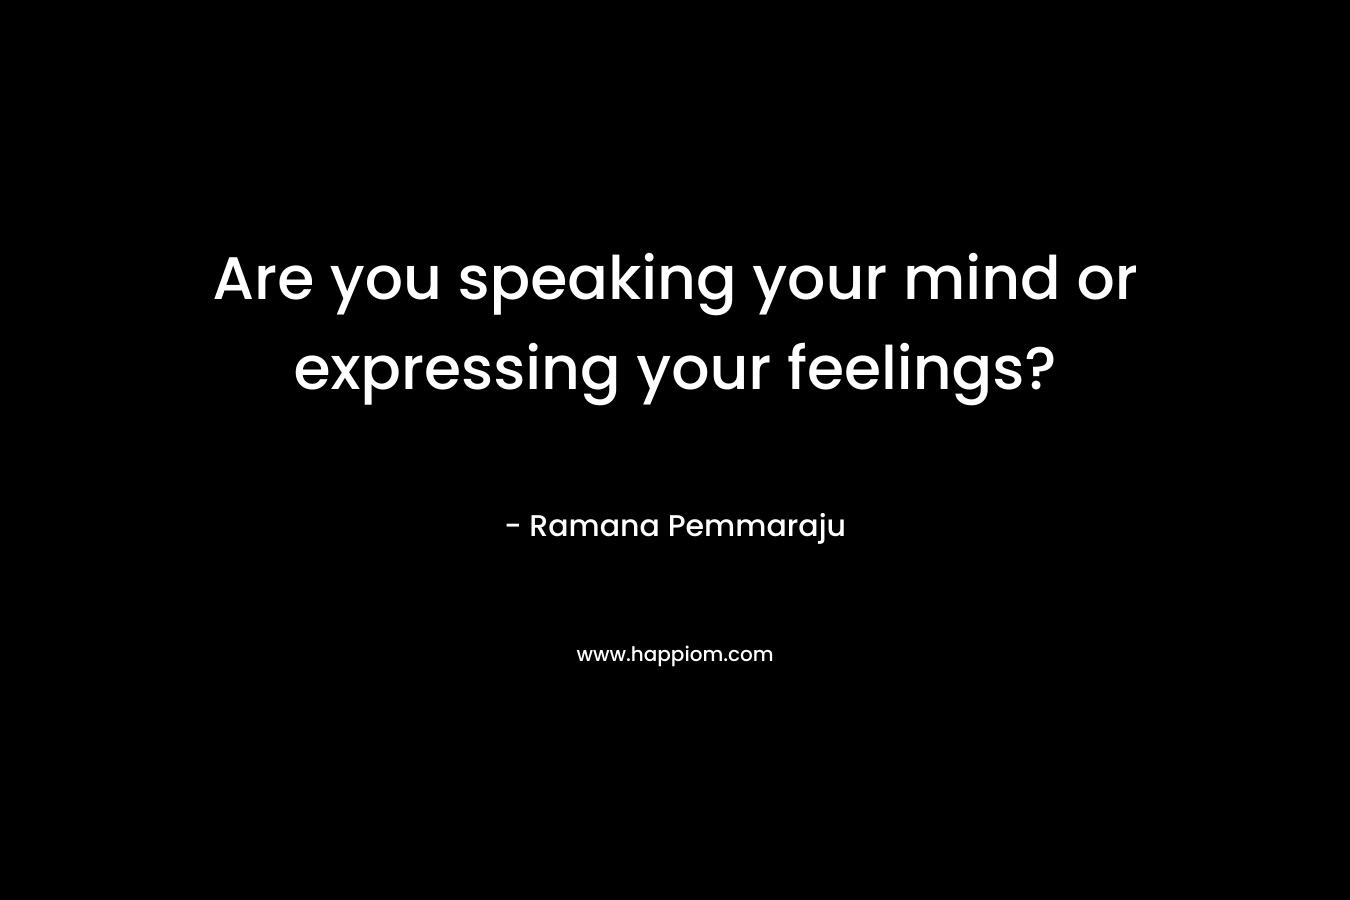 Are you speaking your mind or expressing your feelings?